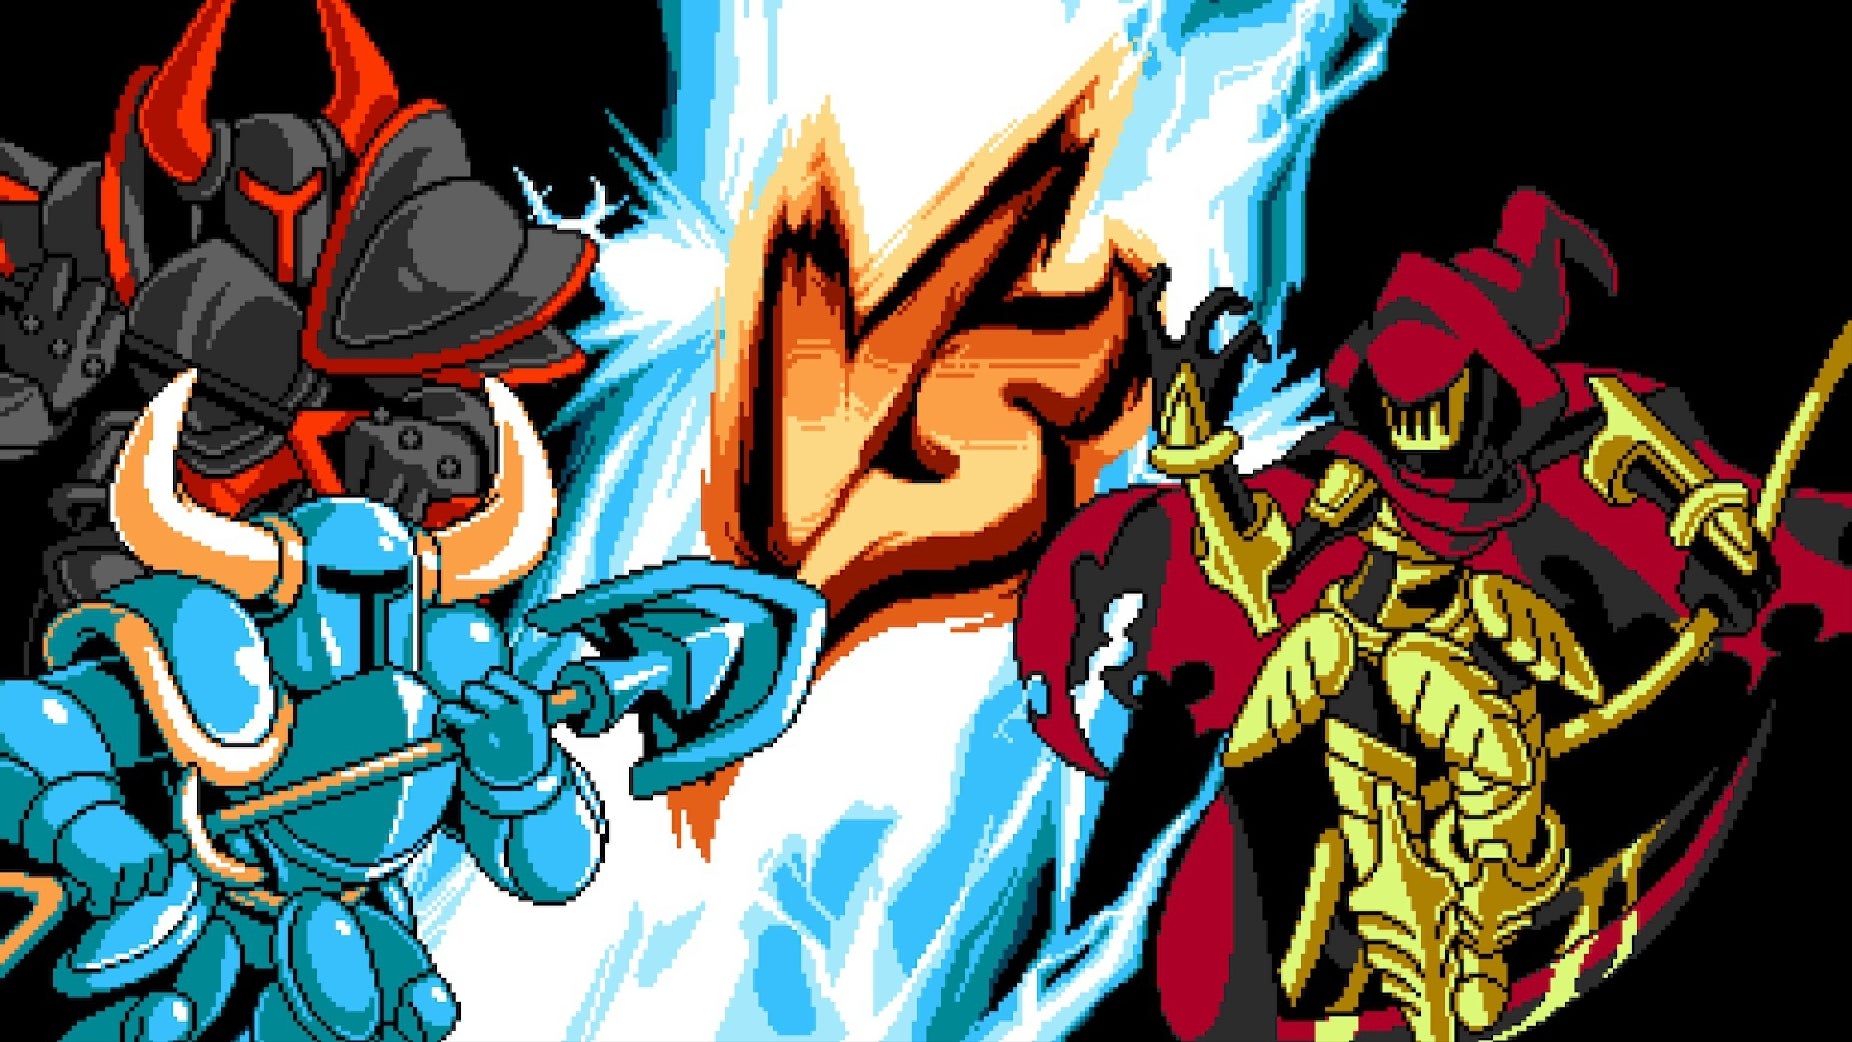 Image for Shovel Knight's fourth and final DLC is multiplayer brawler Showdown